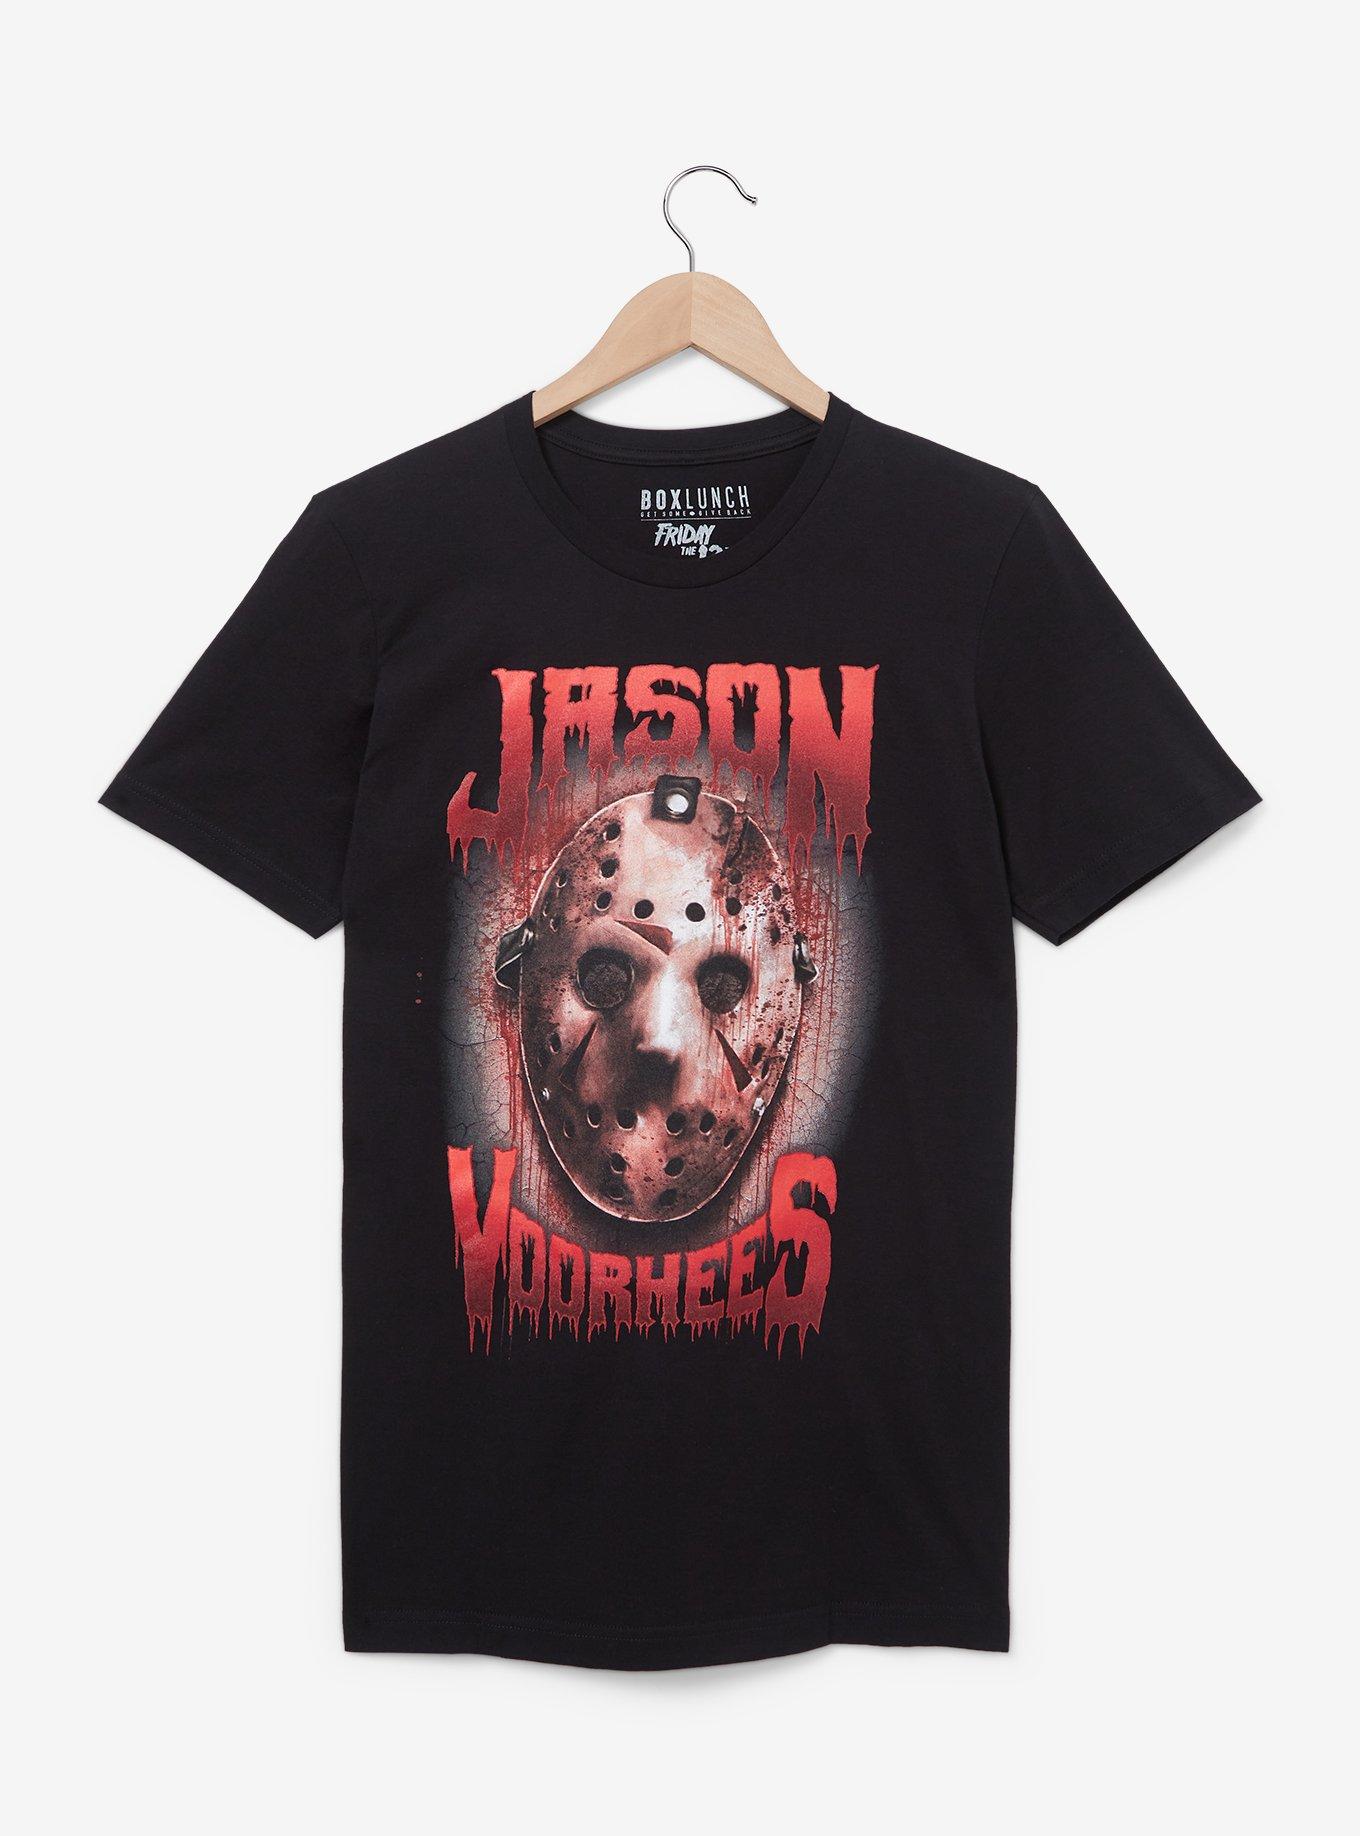 Friday the 13th Jason Voorhees Mask T-Shirt - BoxLunch Exclusive, BLACK, hi-res